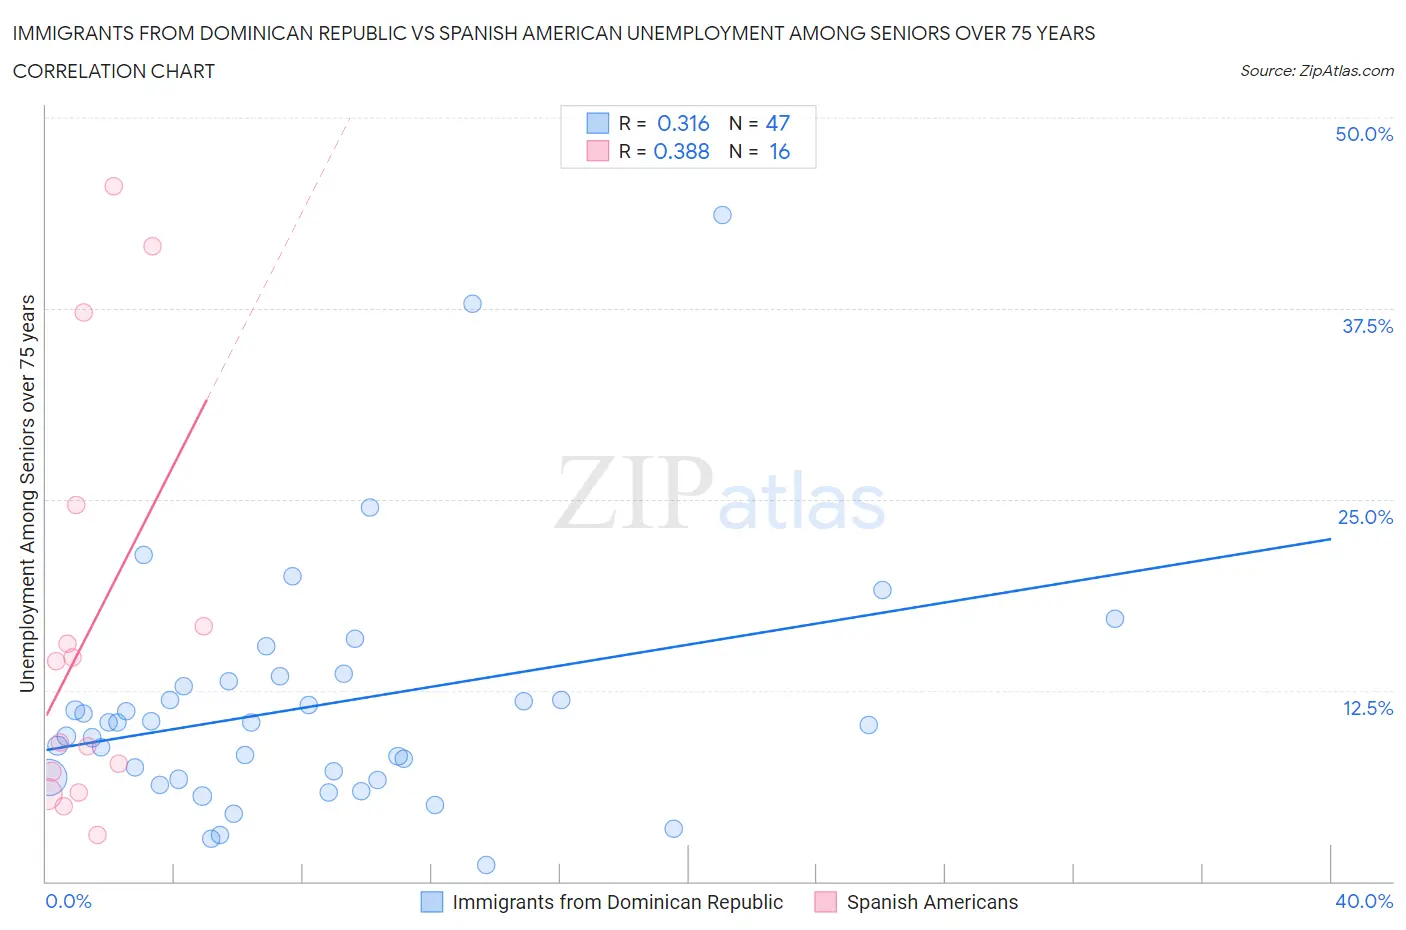 Immigrants from Dominican Republic vs Spanish American Unemployment Among Seniors over 75 years